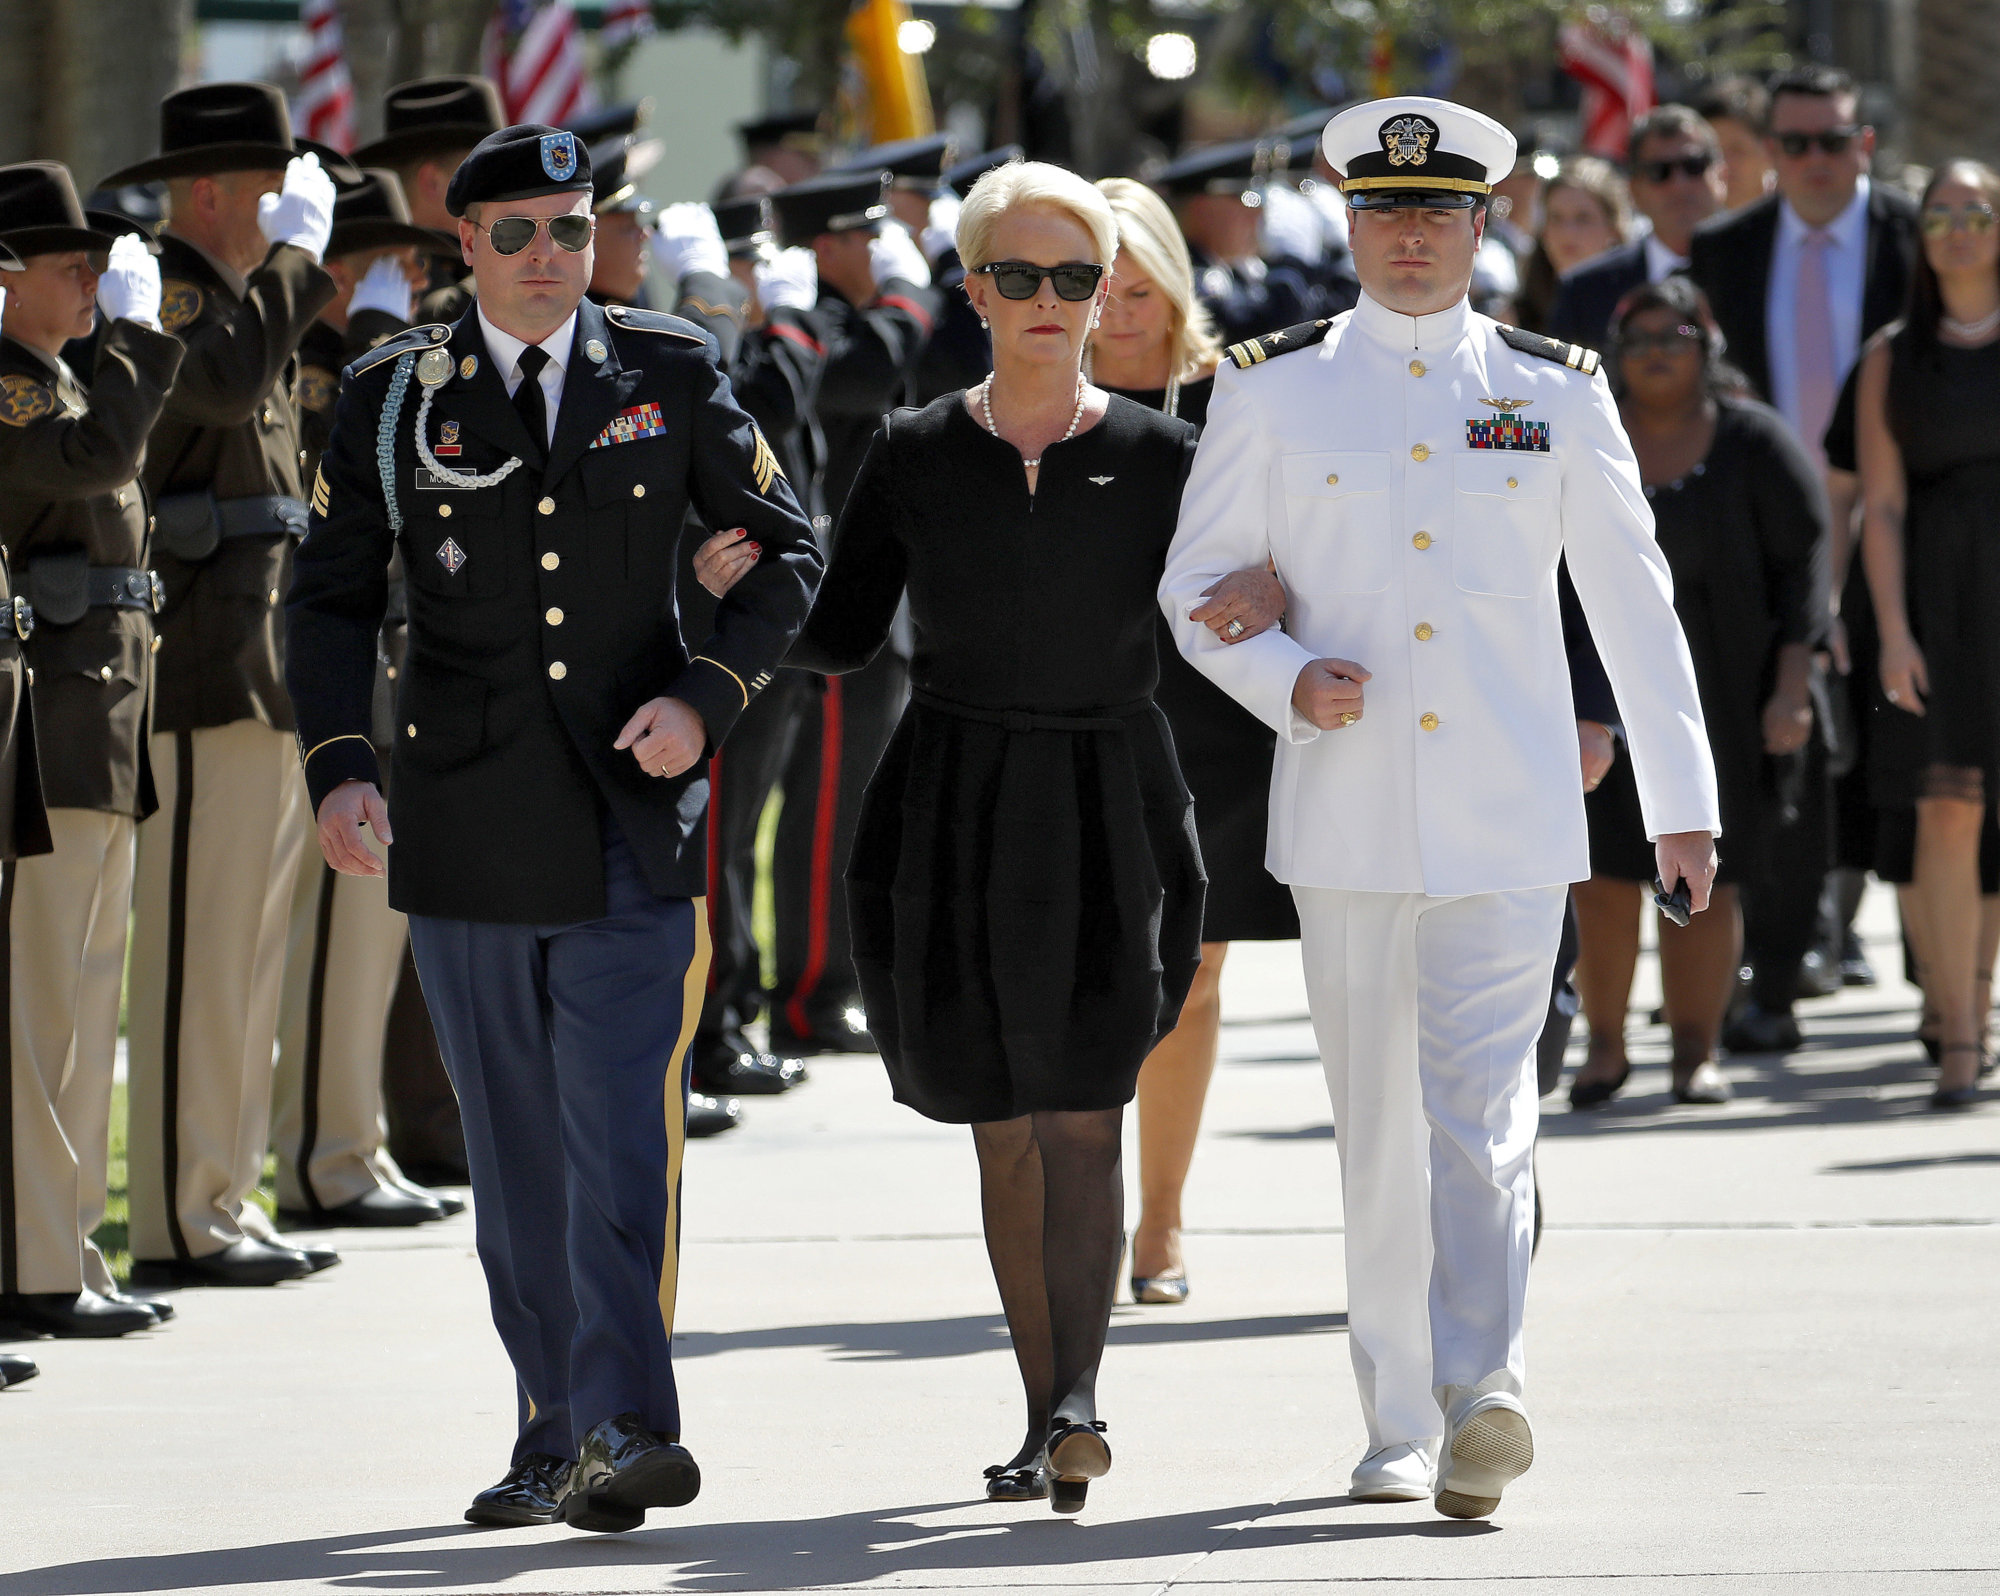 Cindy McCain, escorted by sons, Jack McCain, right, and Jimmy McCain, follow behind military personal carrying the casket of Sen. John McCain, R-Ariz., into the Capitol rotunda for a memorial service, Wednesday, Aug. 29, 2018, at the Capitol in Phoenix. (AP Photo/Matt York)